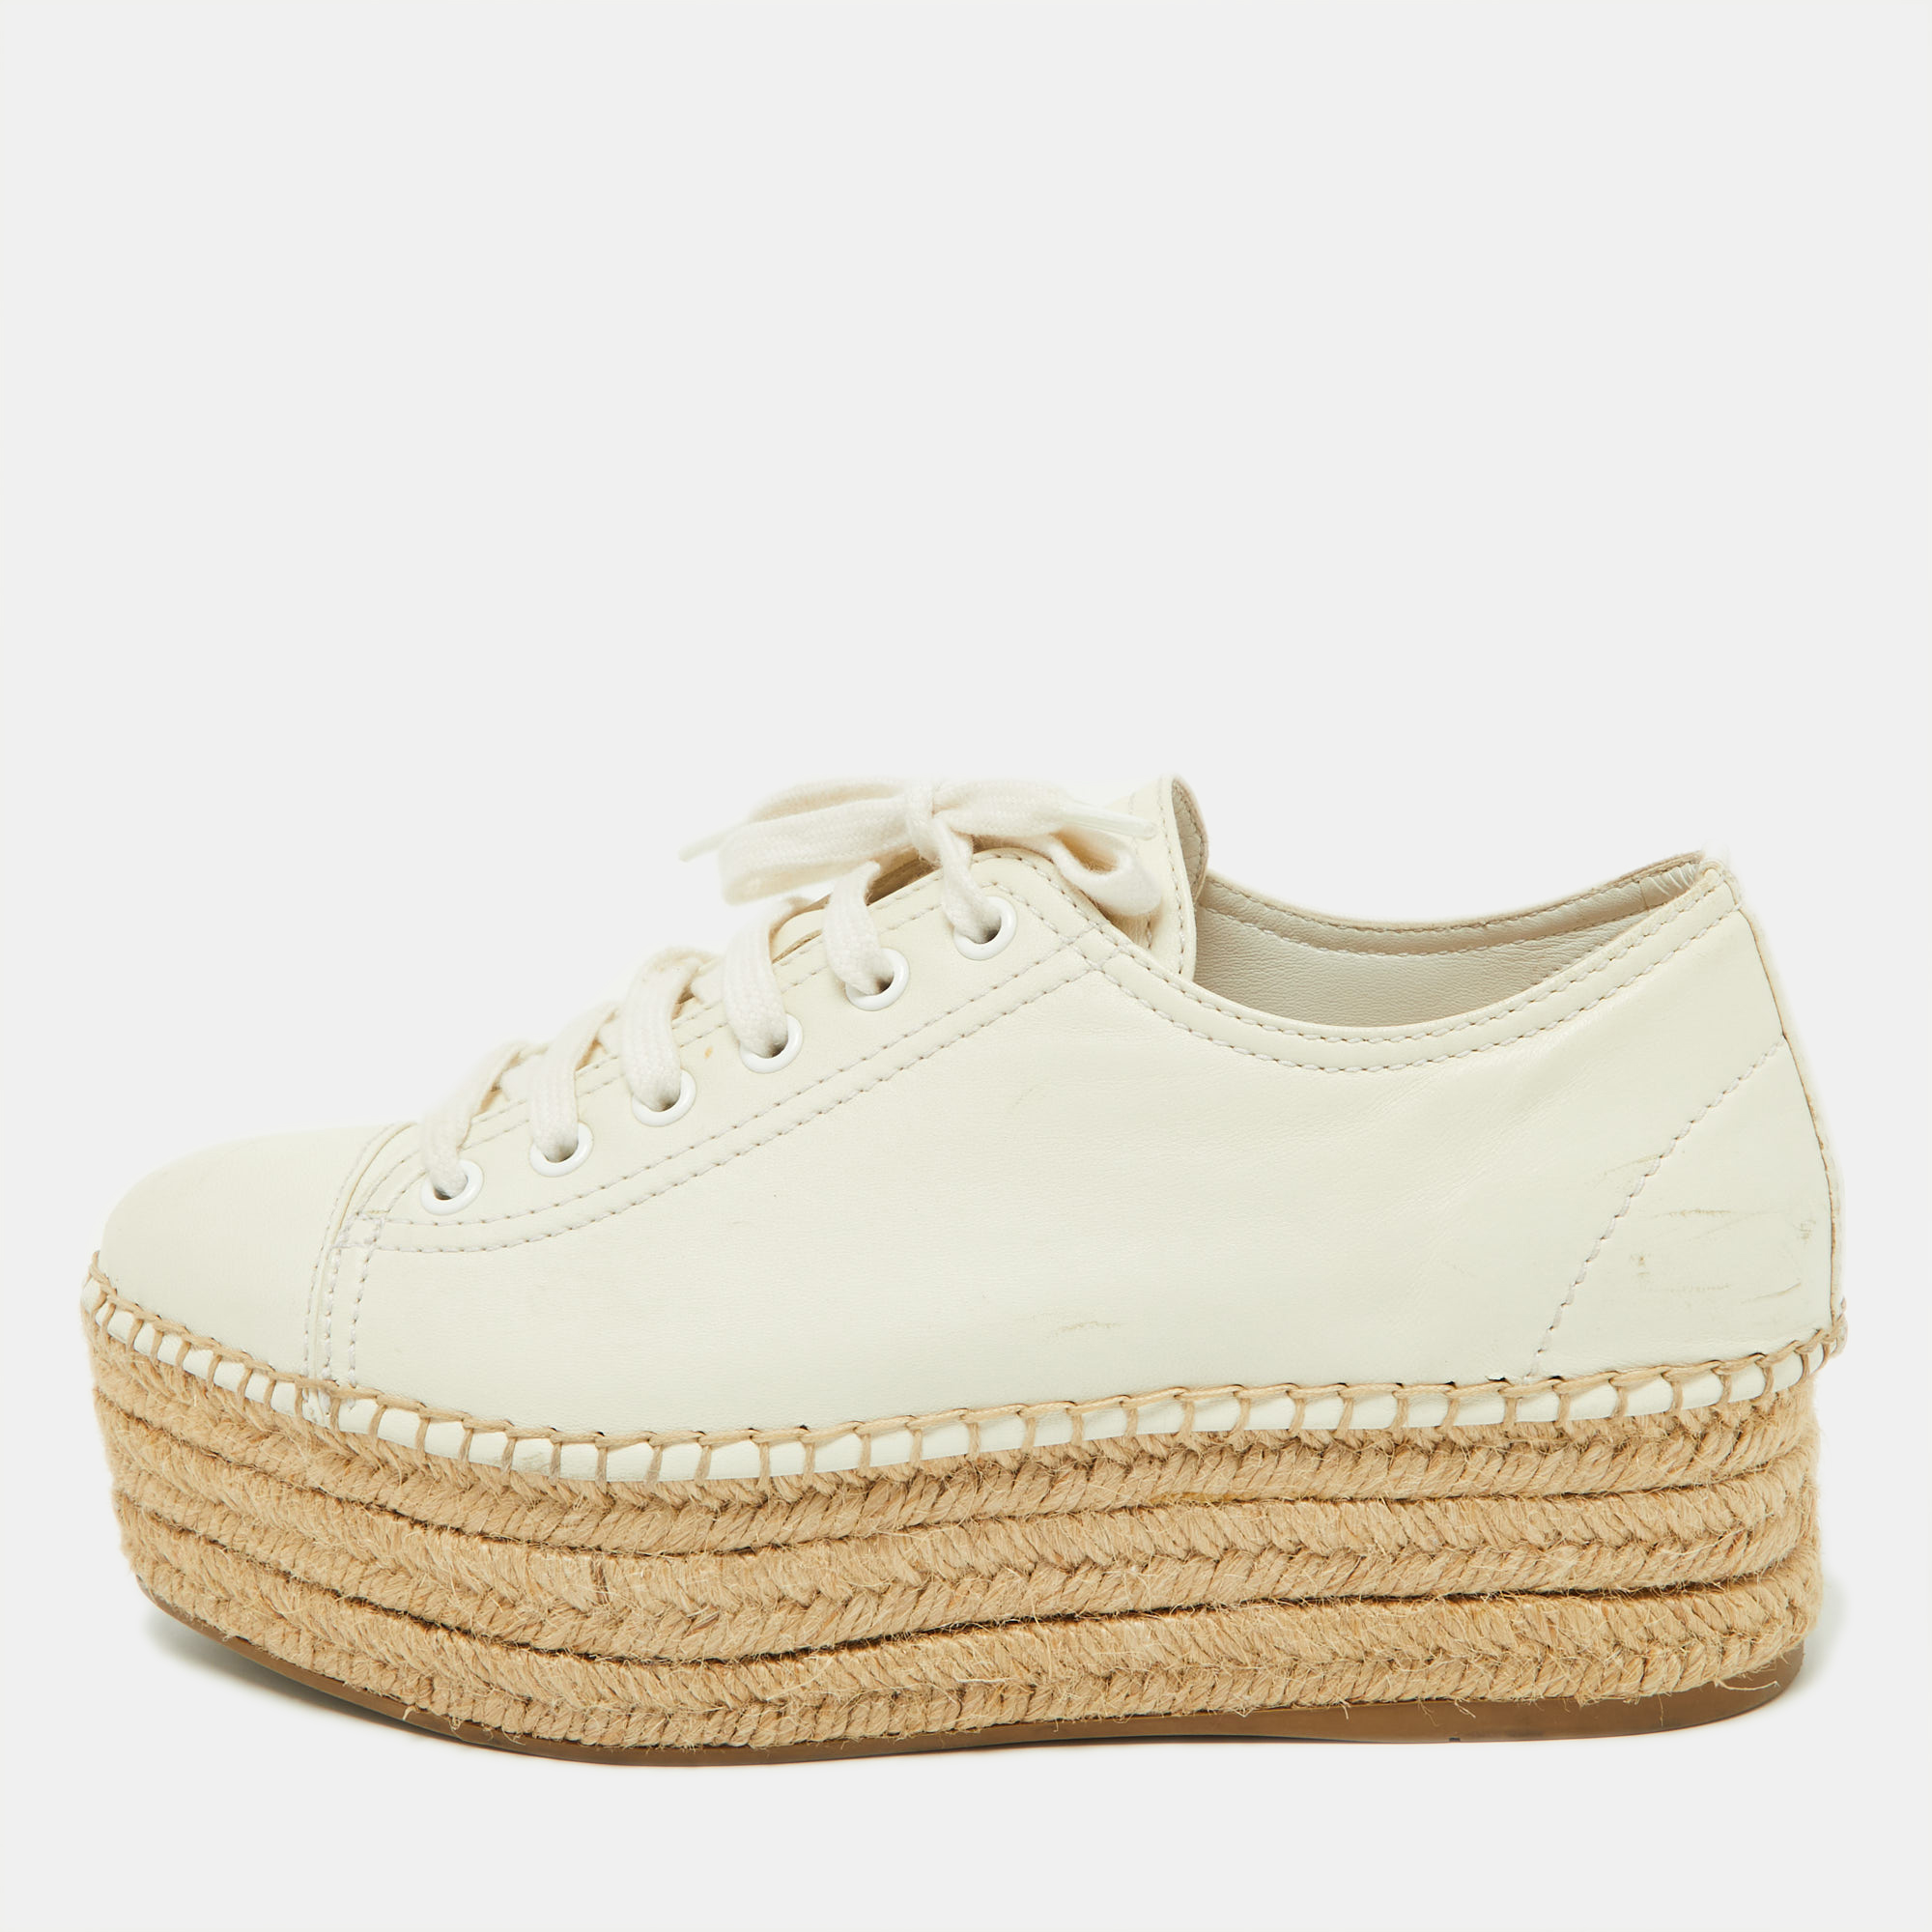 Pre-owned Miu Miu Off White Leather Espadrille Platform Sneakers Size 36